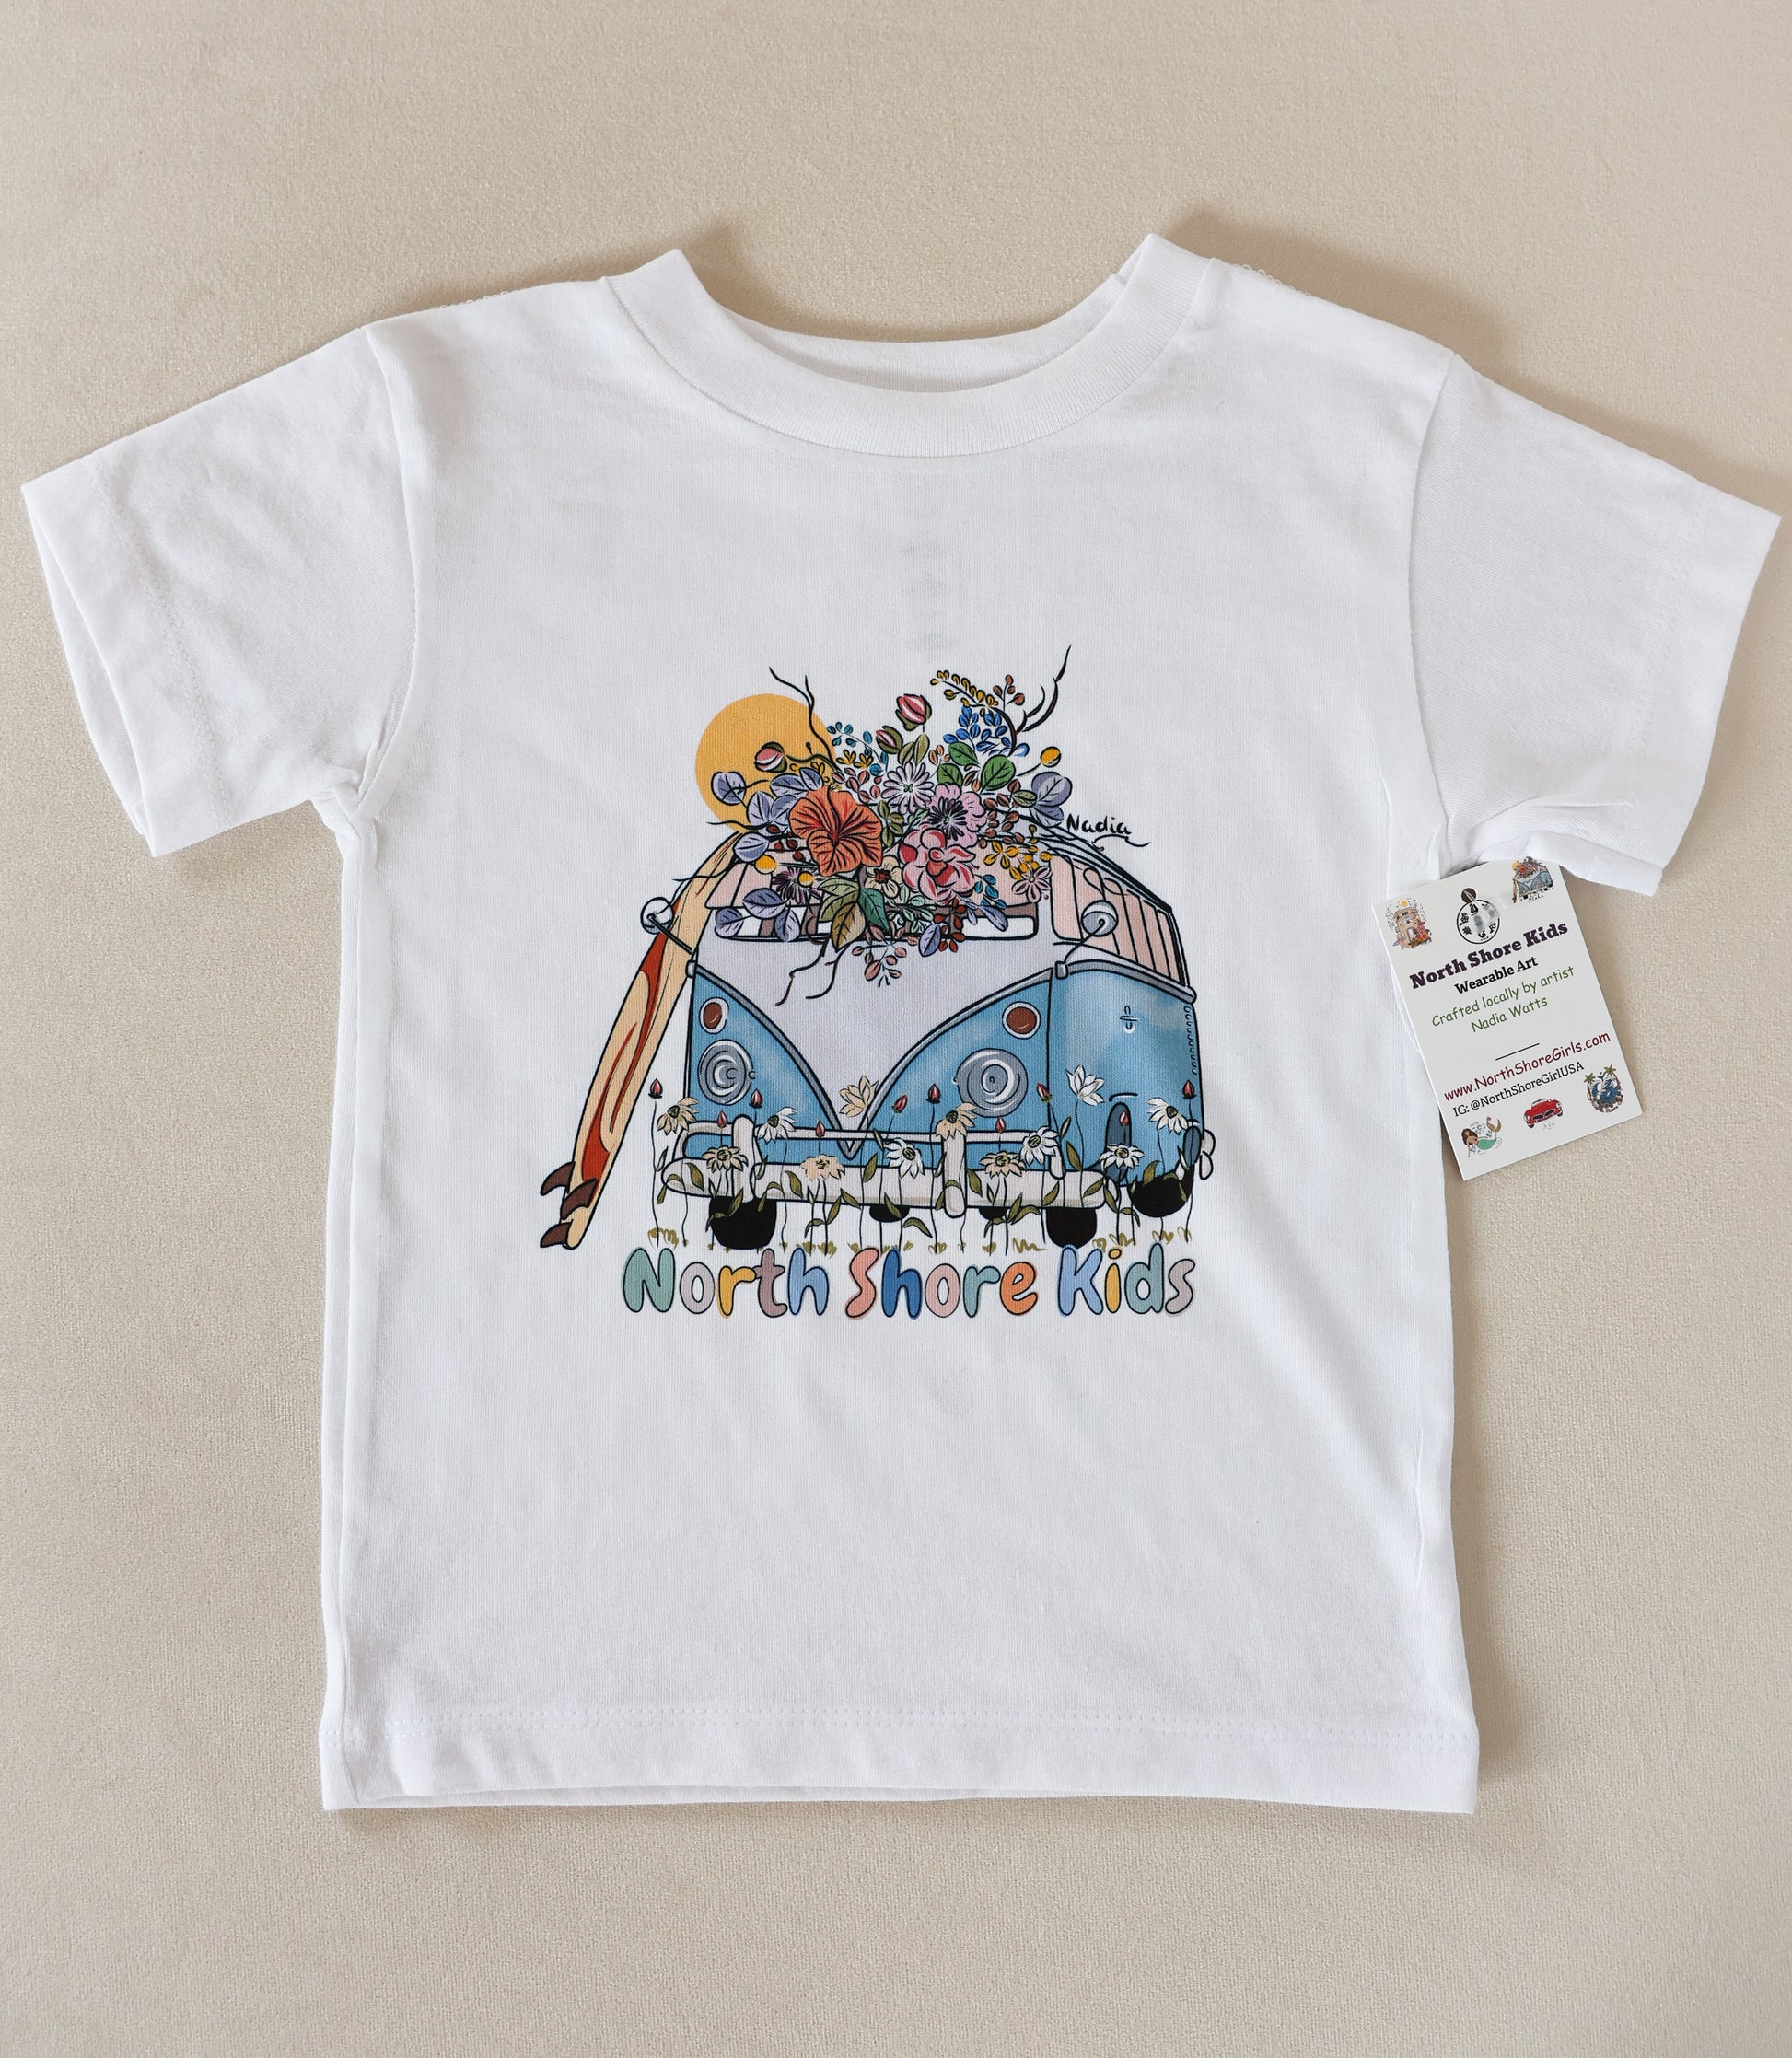 North Shore Kids surf style illustrated tee for kids